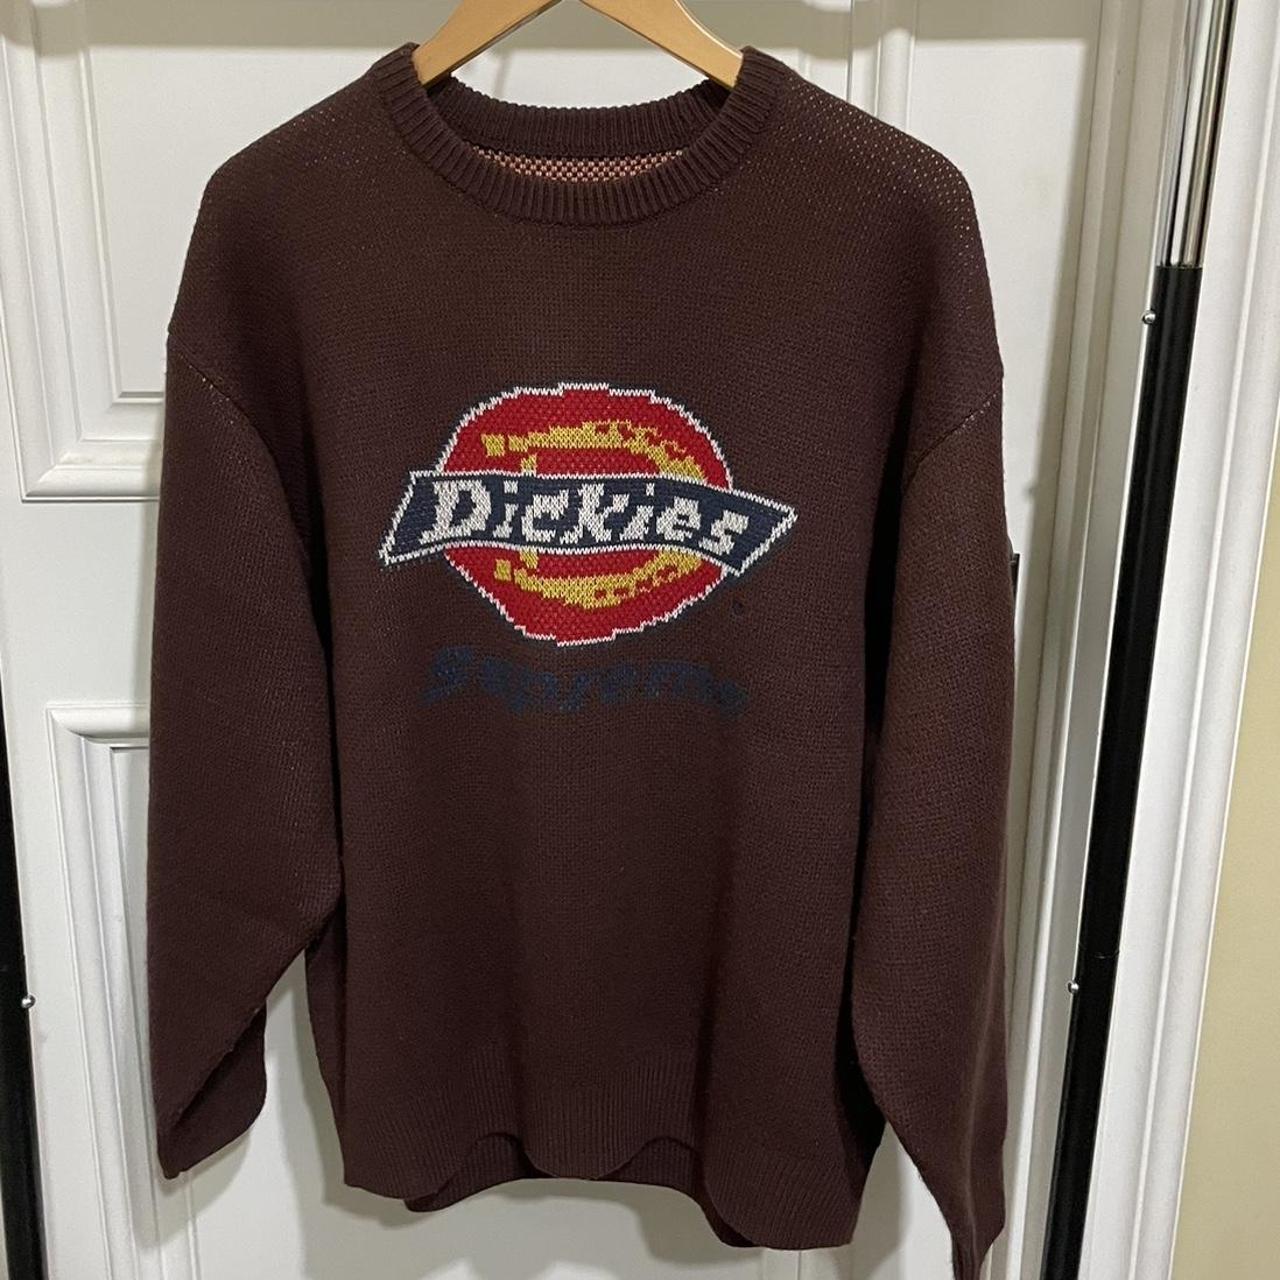 supreme x dickies sweater (brown) worn a couple times - Depop